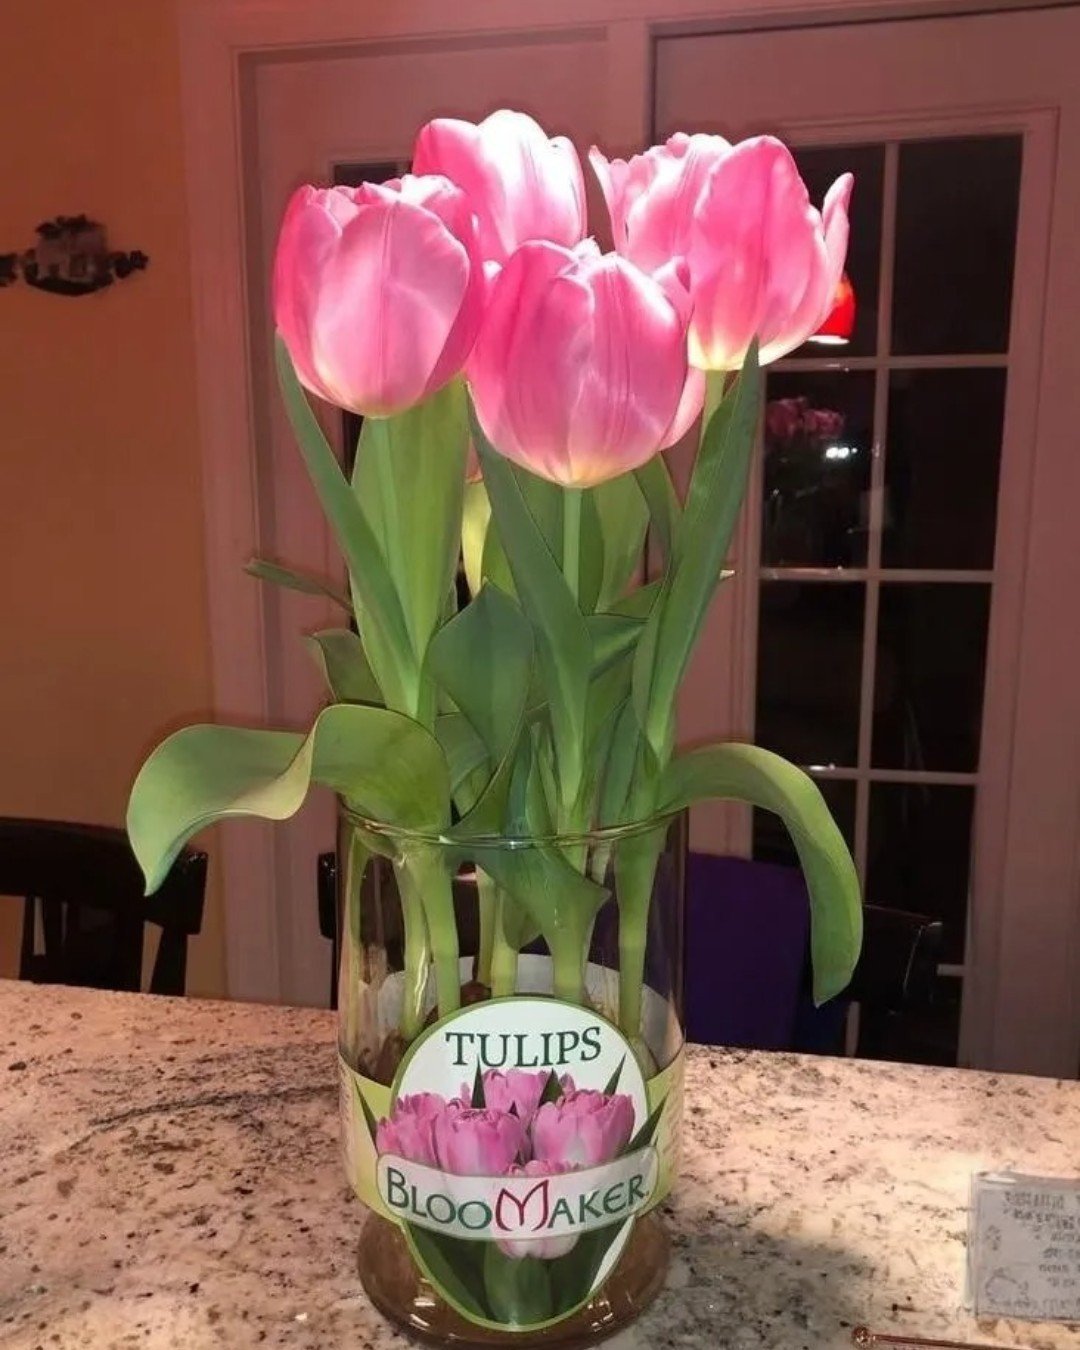 Did you know tulips were once more valuable than gold in Holland?! Our Long Life Tulips are available in a variety of colors at a store near you! What&rsquo;s your favorite tulip color? Comment below!! 🌷✨
.
.
.
.
#FunFact #FlowerFacts #Tulips #Holla